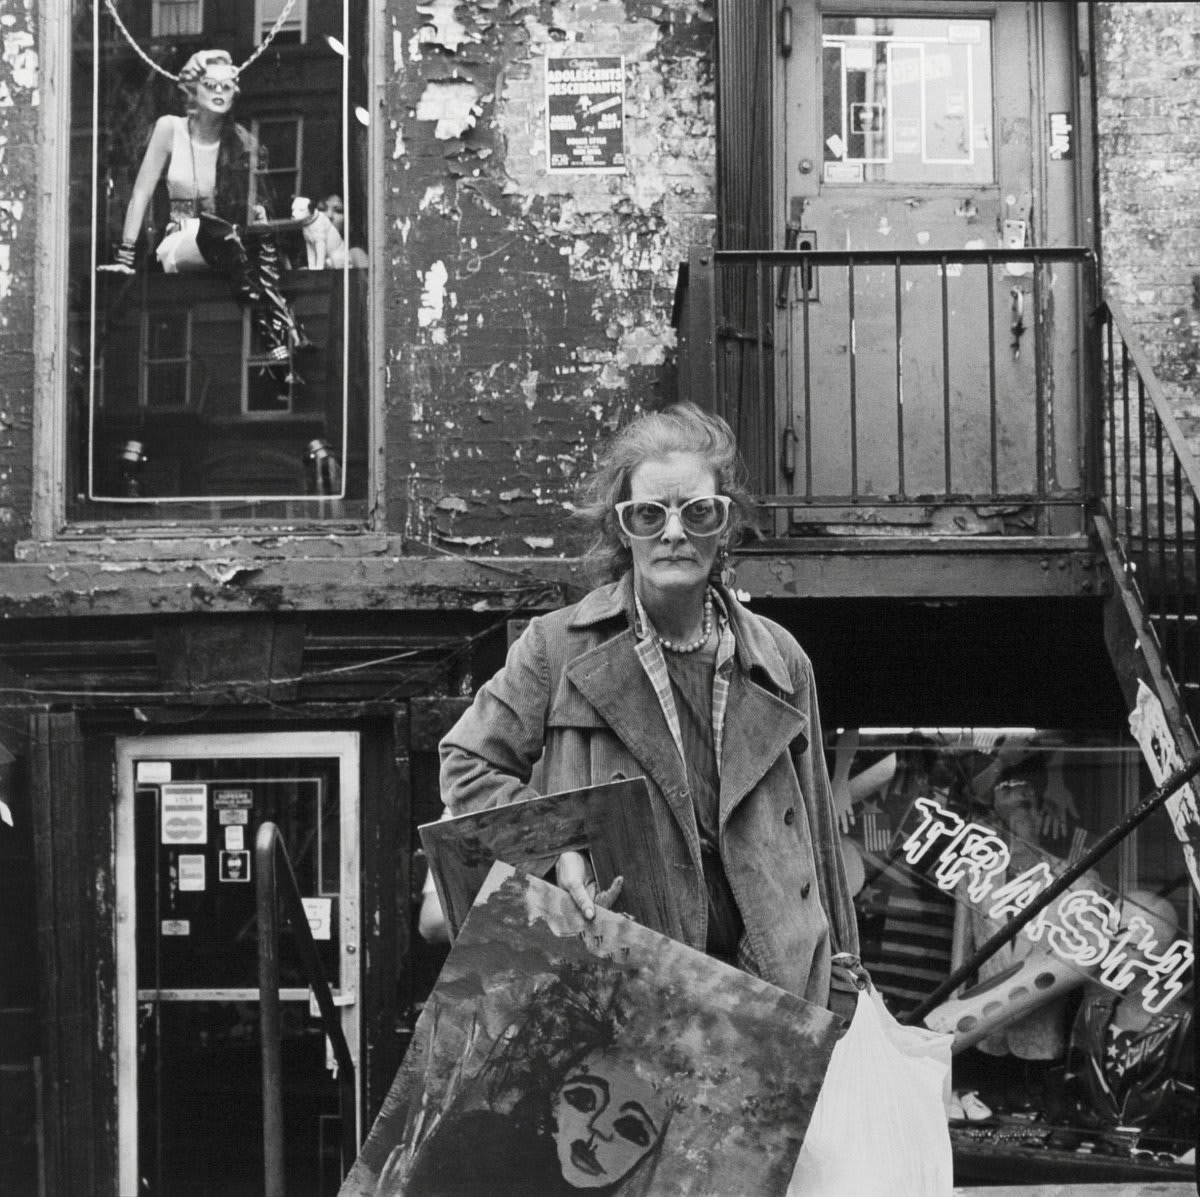 “We are the subject” opens at @BSG_NYC on July 12. The show features the work of Lisette Model, Diane Arbus and Rosalind Fox Solomon. https://t.co/IO2CUplMdE Rosalind Solomon, An East Village Painter, New York, New York USA, 1986. Courtesy Bruce Silverstein Gallery.